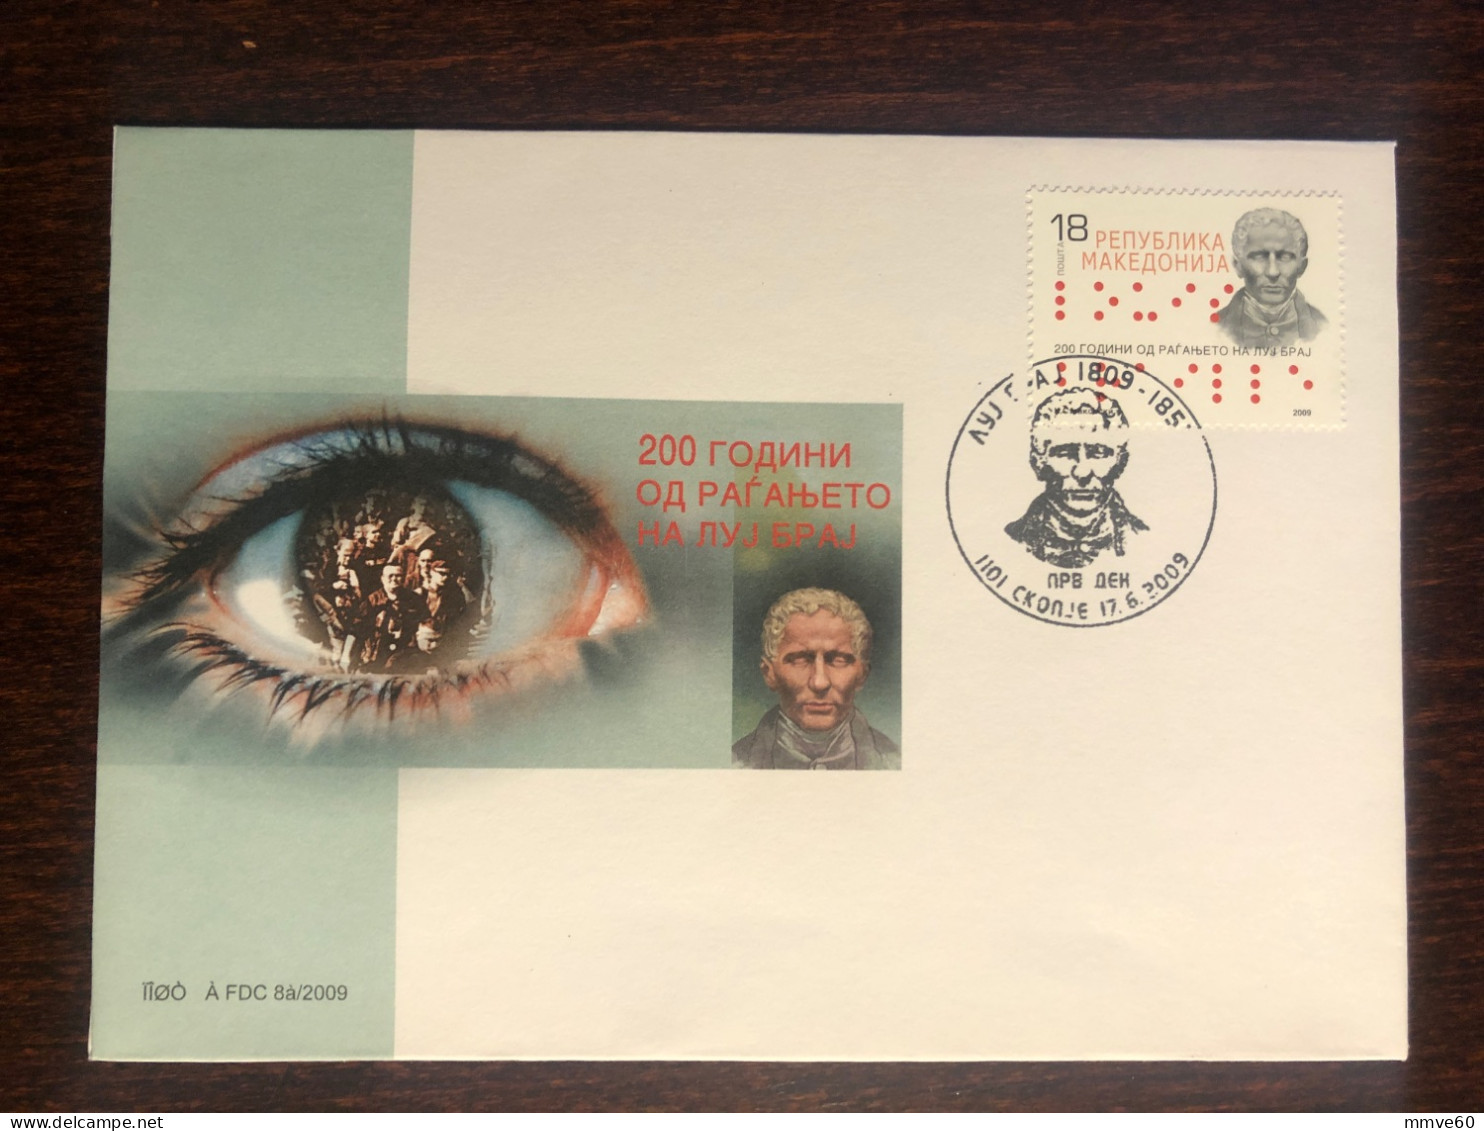 MACEDONIA FDC COVER 2009 YEAR  BLINDNESS BLIND BRAILLE HEALTH MEDICINE STAMPS - Macédoine Du Nord